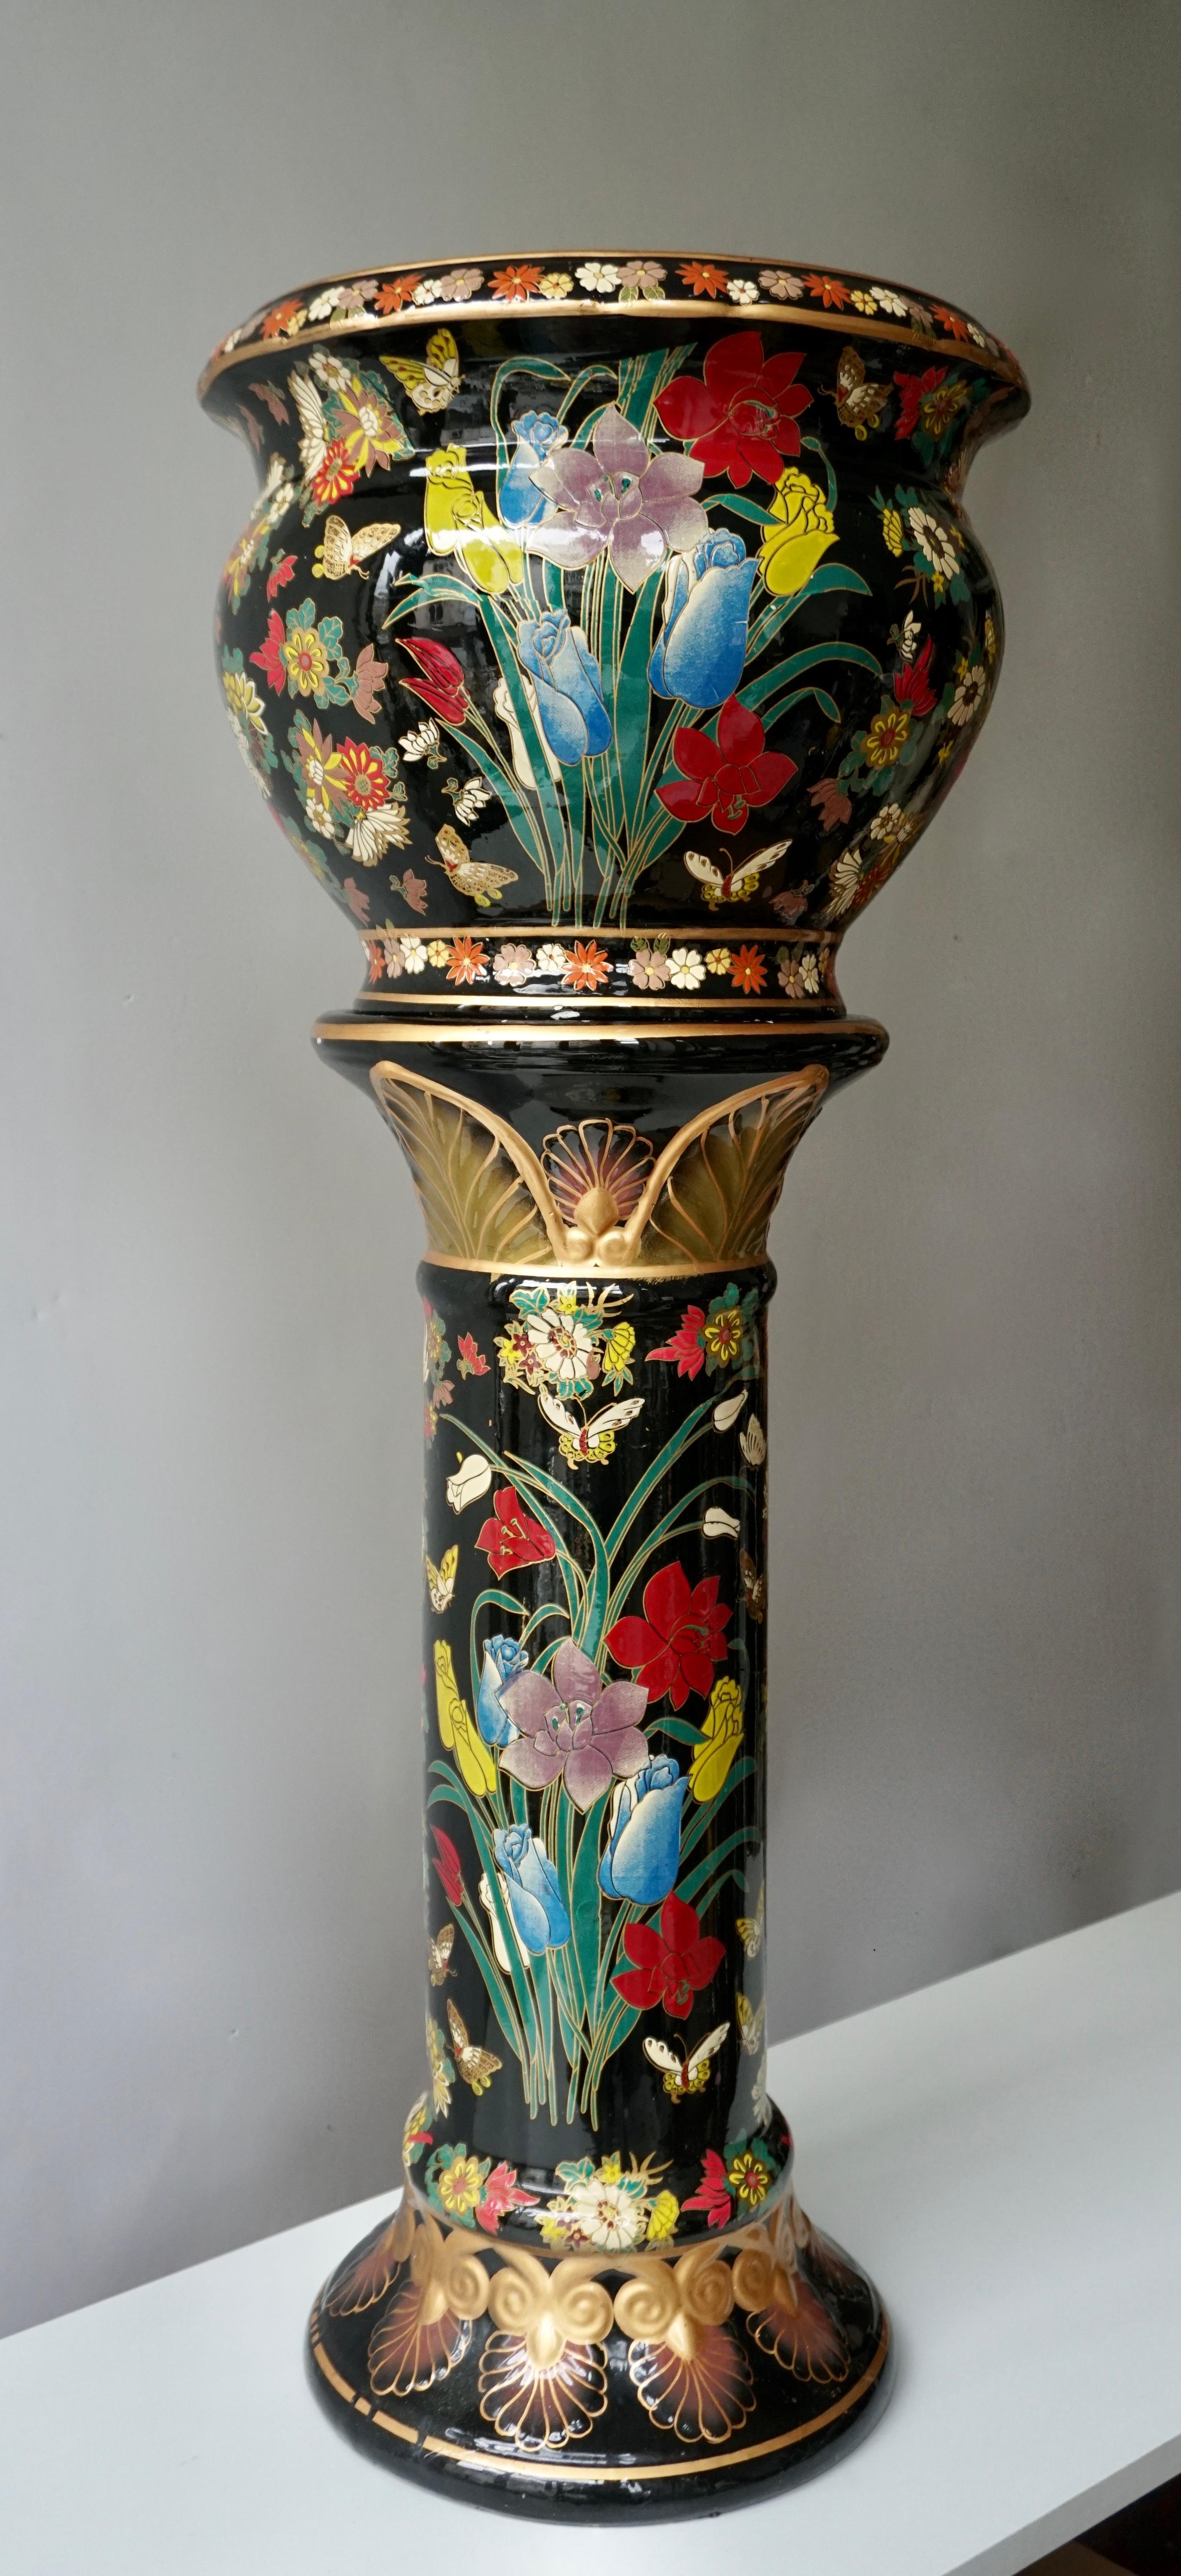 Planter with stand.The jardinière is exactly matched to the stand on which it sits. Design period, circa 1960.

Dimensions: 
Complete height 88 cm, 34.6 inch 

Jardinière / pot: External diameter 34 cm, 13.38 inch - Height 28 cm, 11.02 inch